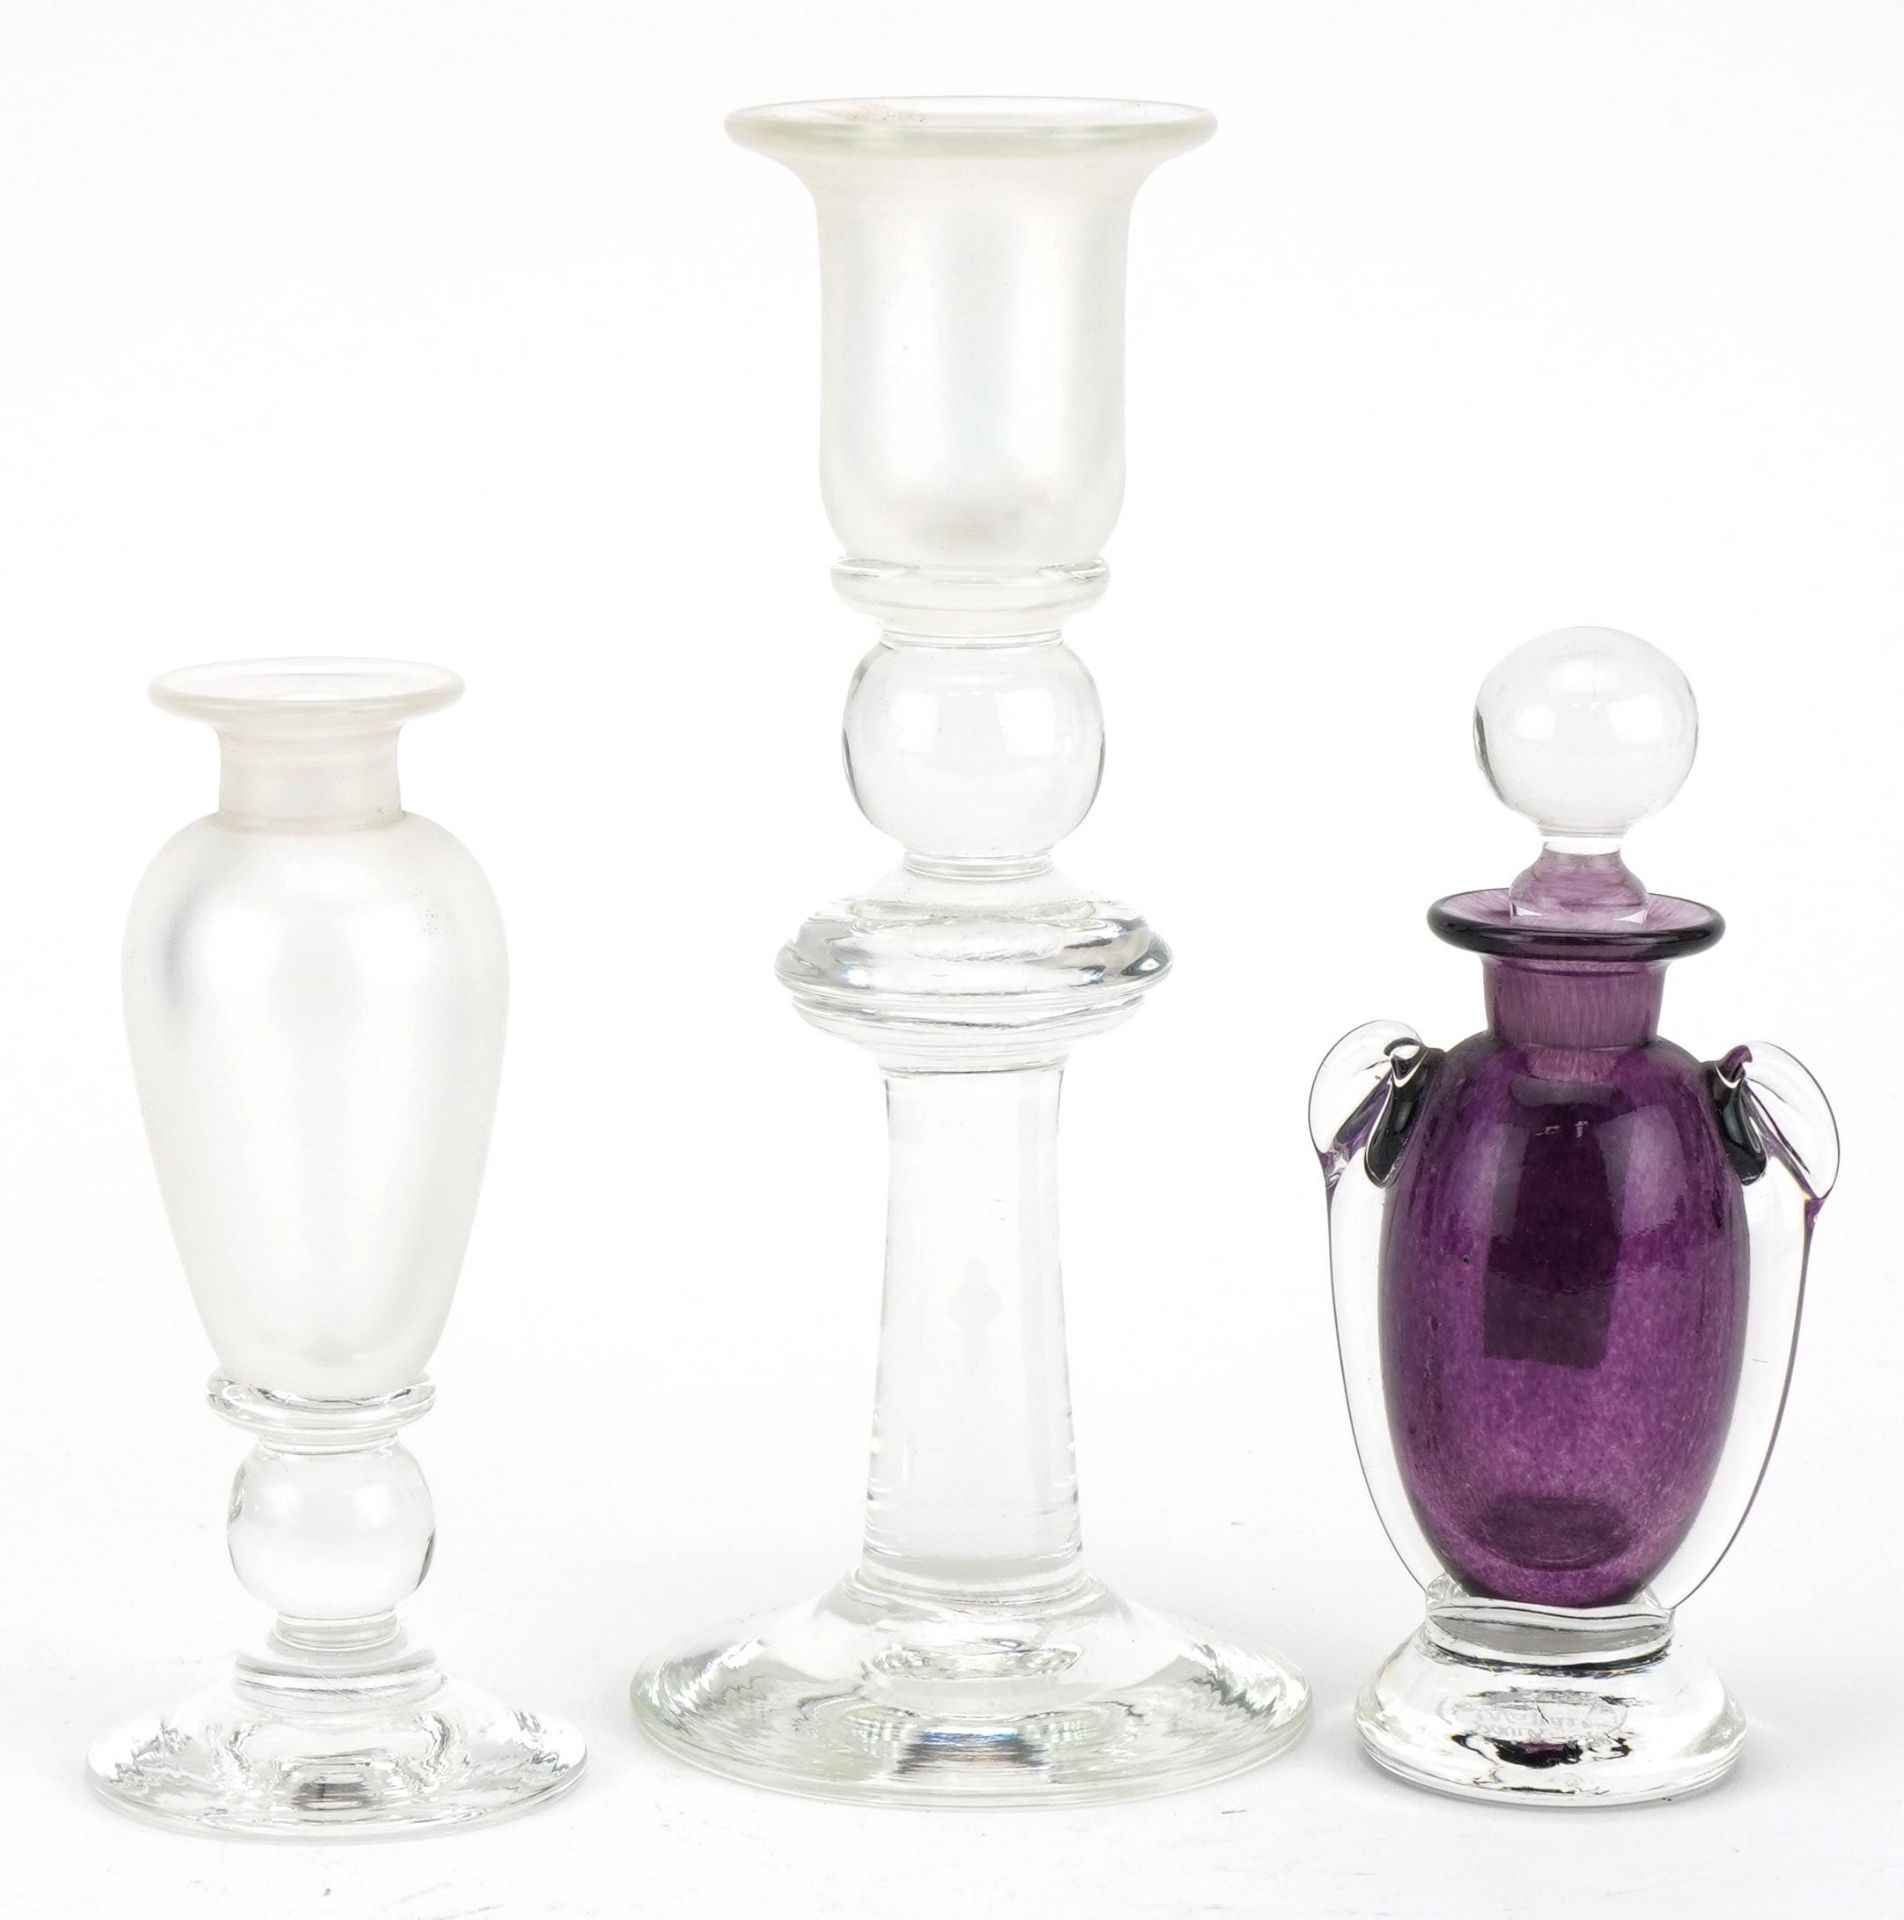 David Wallace Art glassware including a purple scent bottle with handles and stopper and